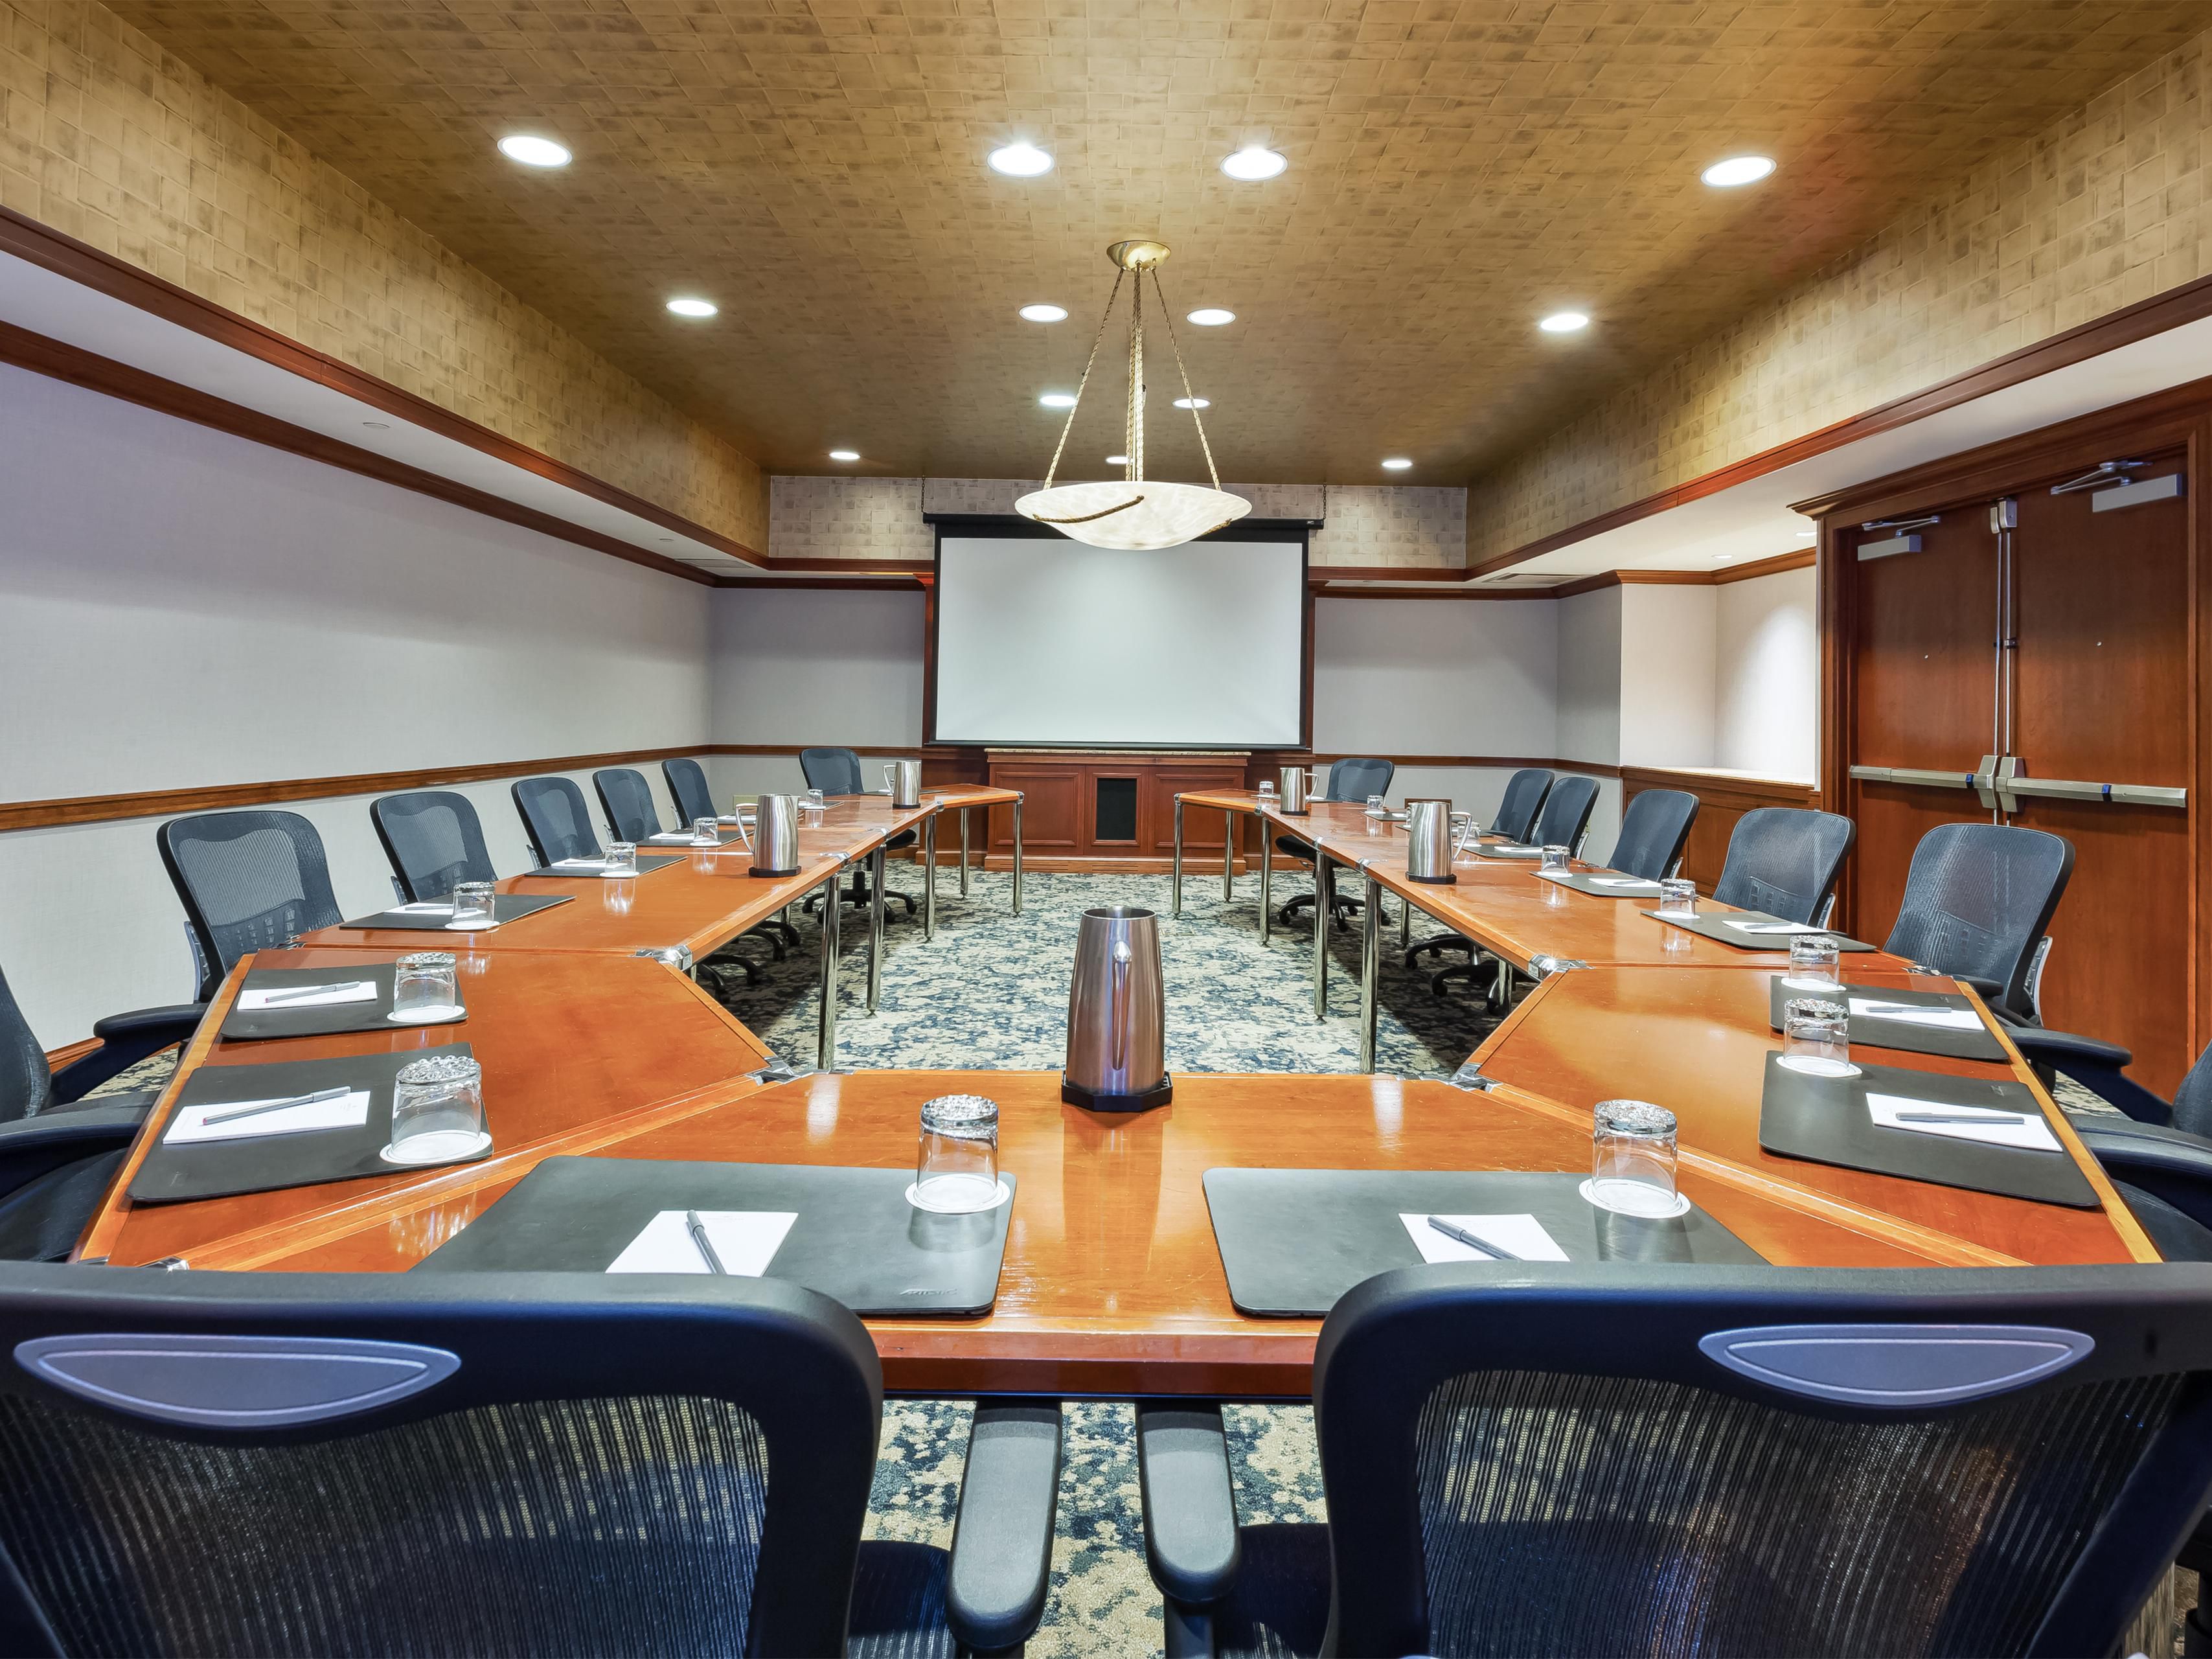 Our hotel features 14,500 square feet of flexible meeting space, making our conference space and ballrooms ideal for any event. All our meeting rooms are outfitted with audio and visual capabilities to ensure productive meetings. Event catering is available. With the help of our hotel's Meetings Director, you can seamlessly plan your event.